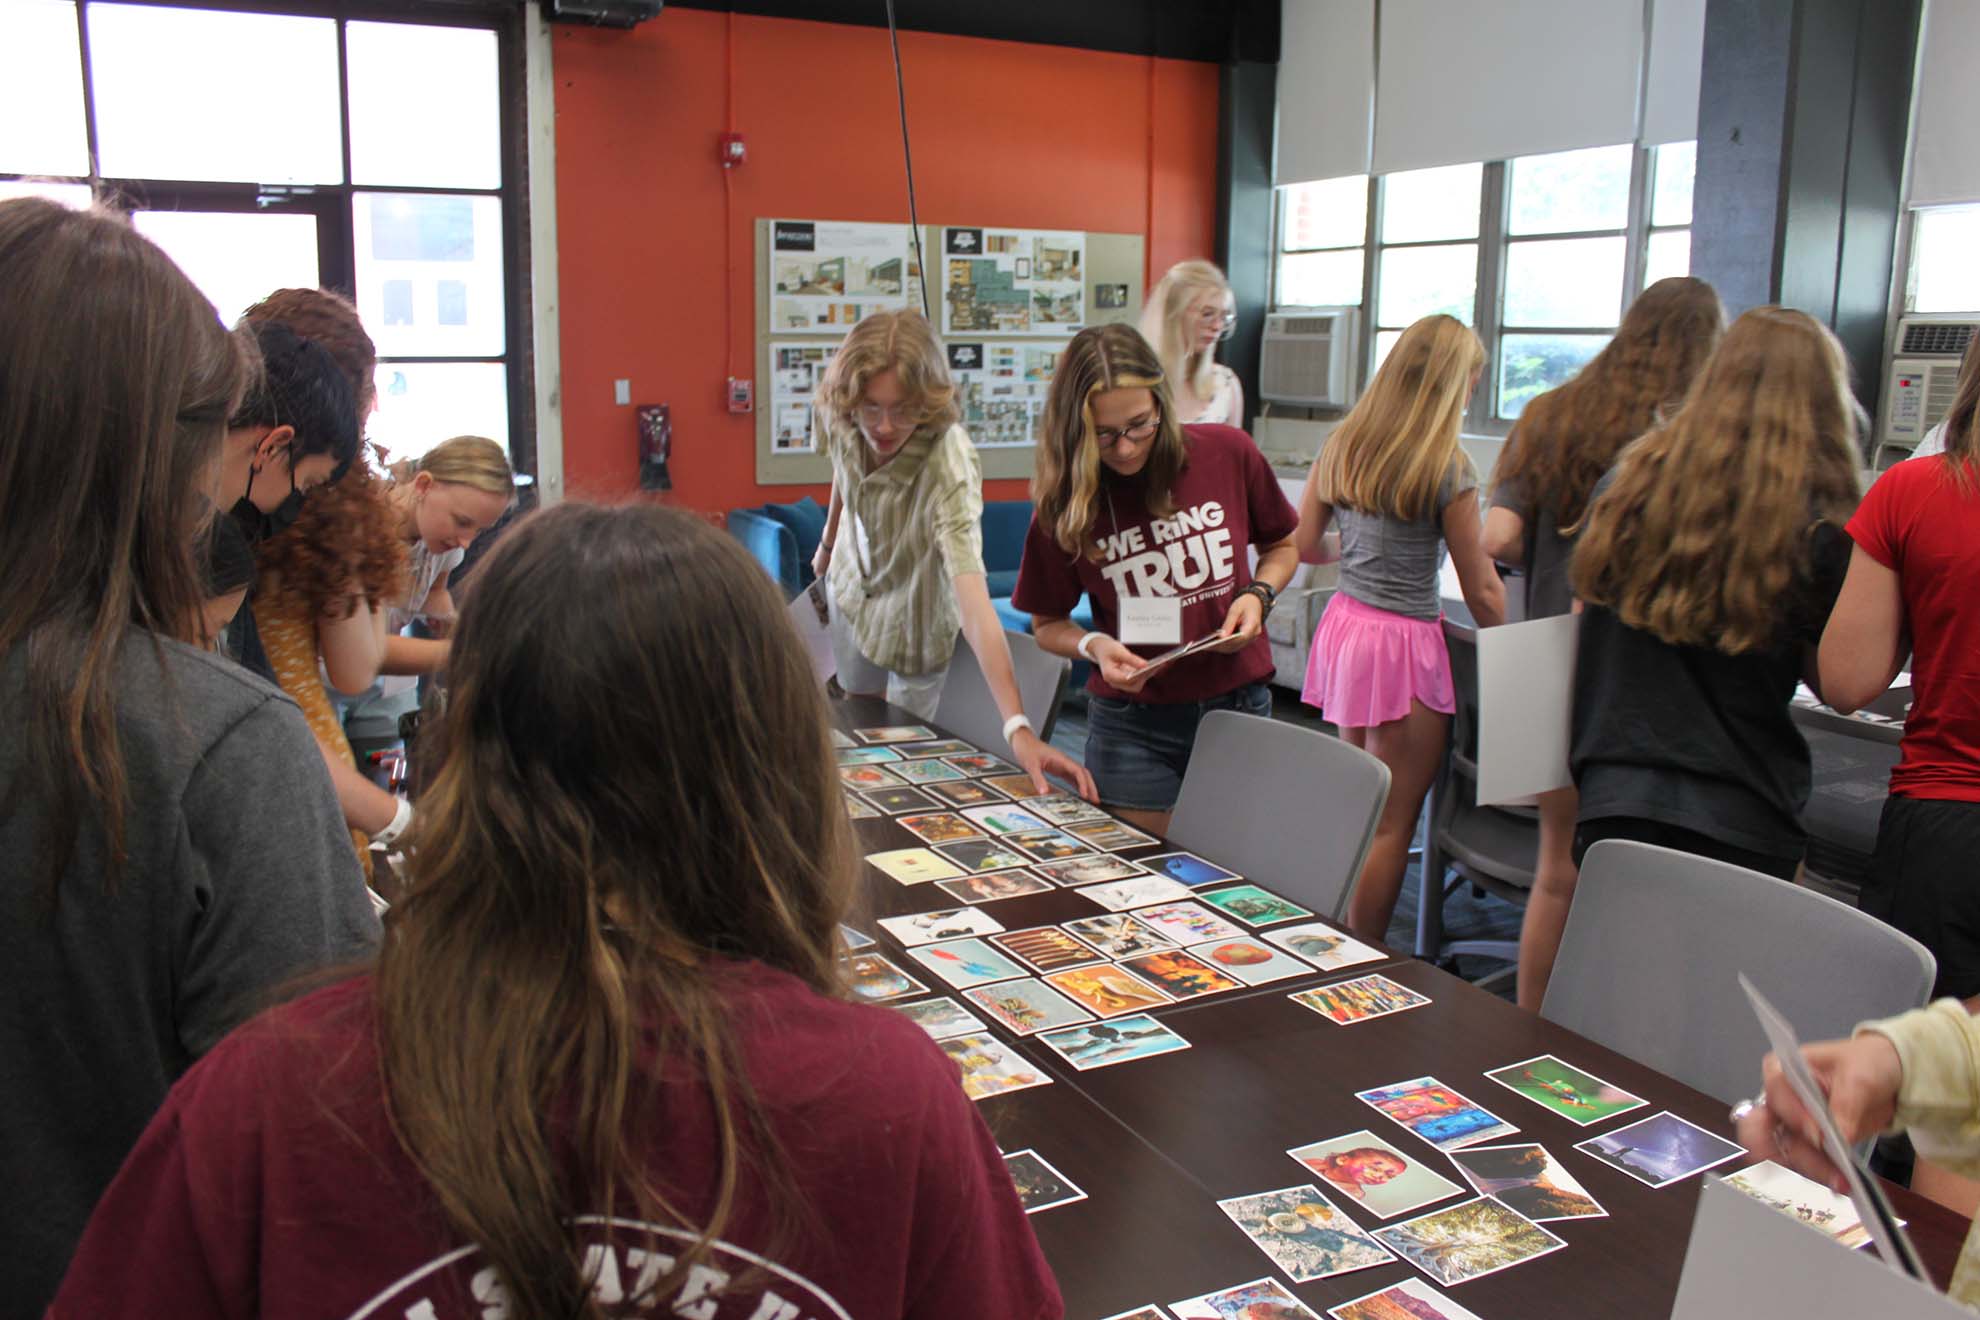 The campers pick out images for their mood boards.